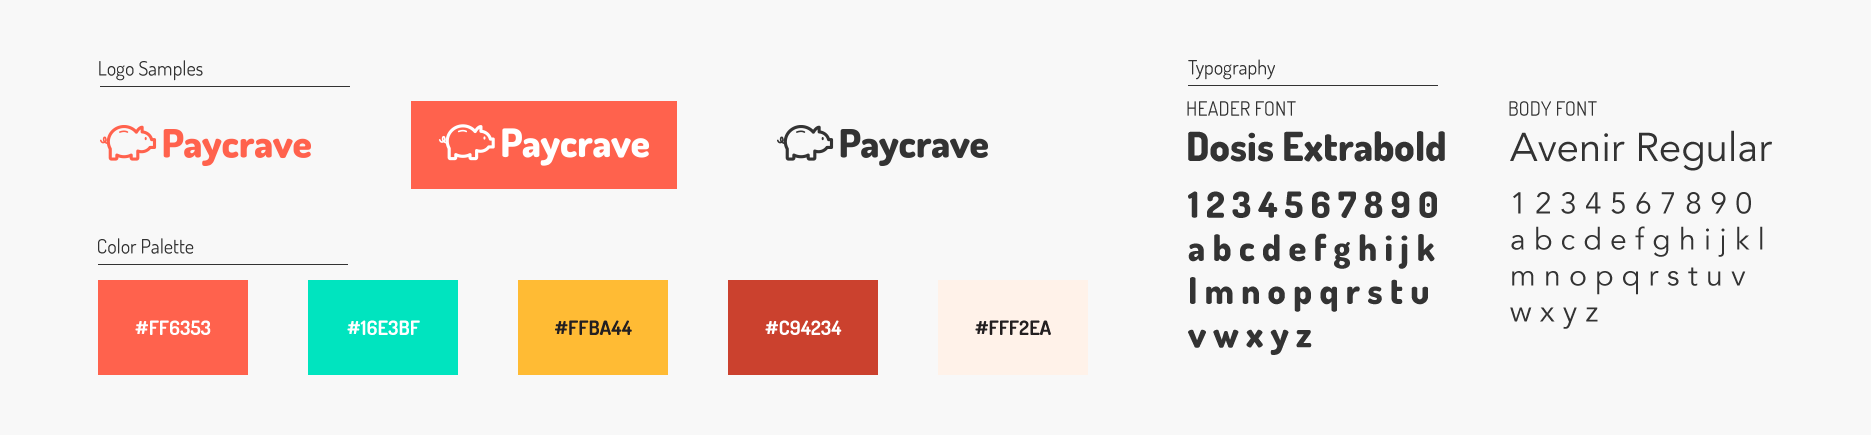 Paycrave Style Guide